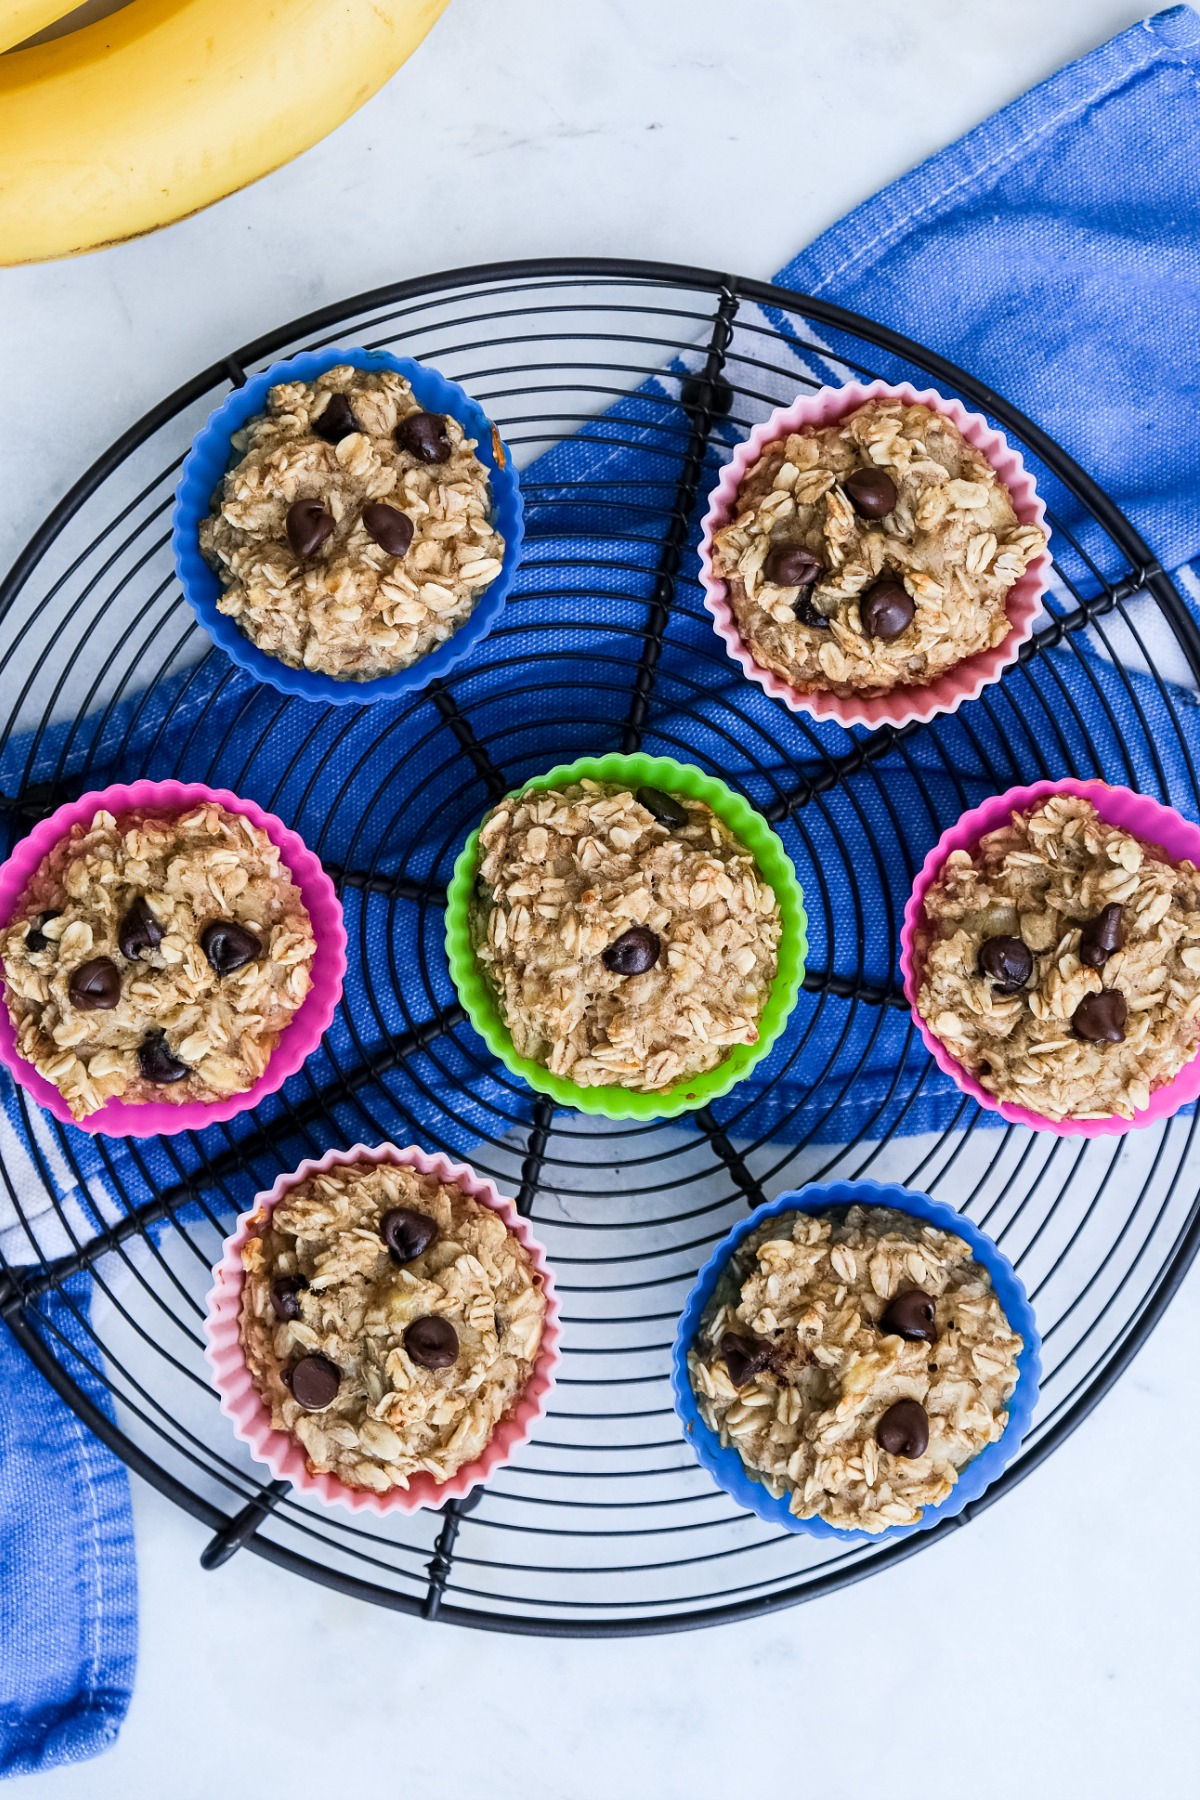 Healthy Tender Baked Oatmeal Cups Recipe with Banana - The Foodie Affair